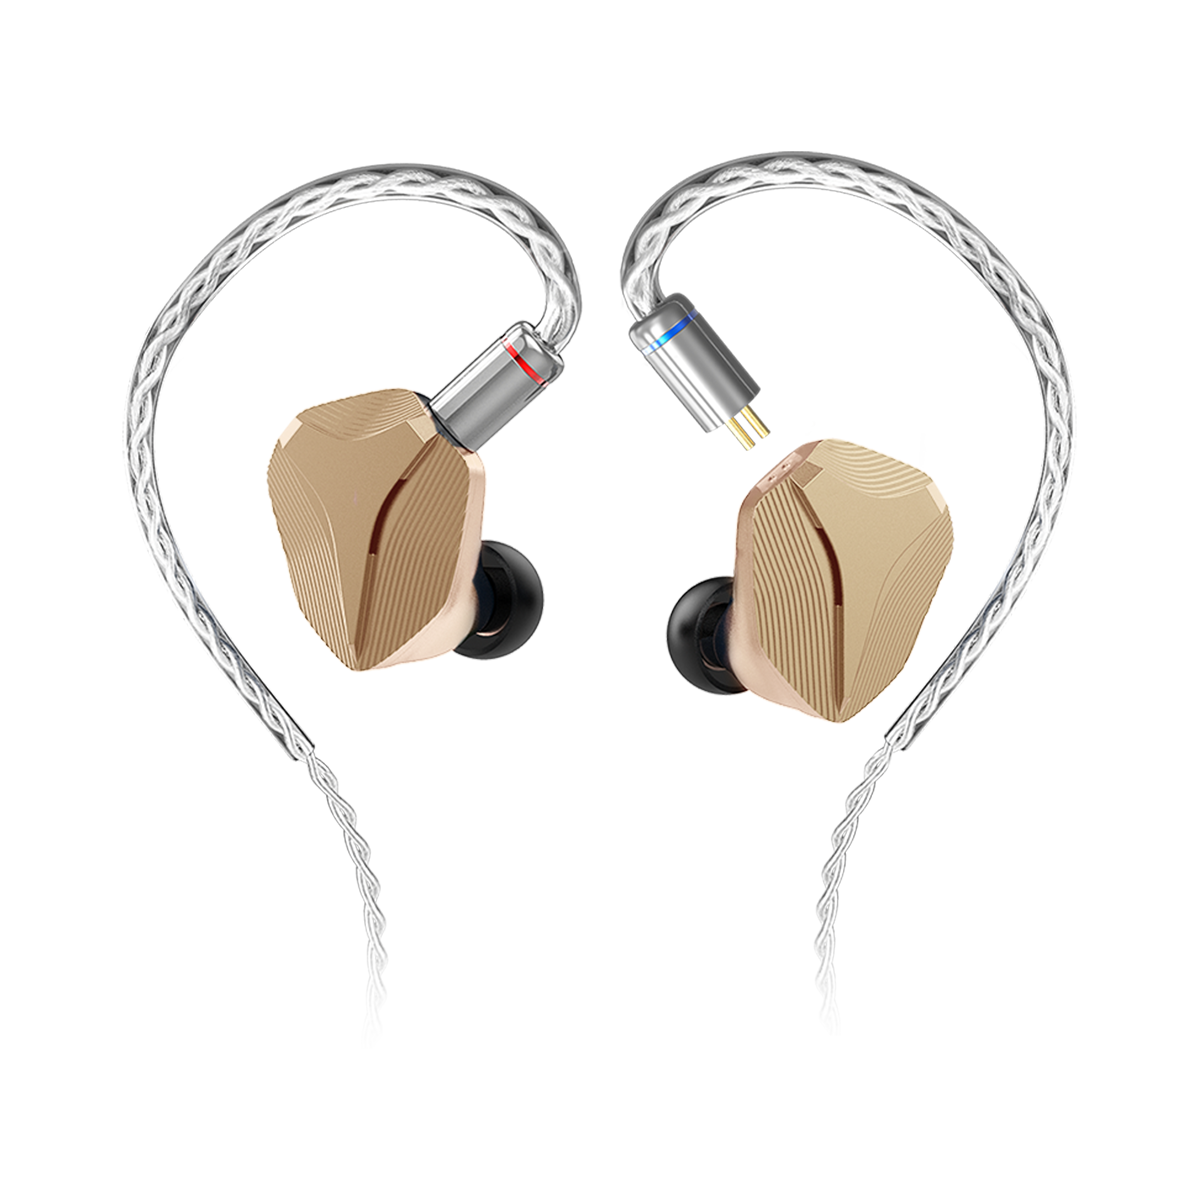 HIDIZS MP145 Planar Magnetic Driver In Ear Monitors for Audiophiles and Music Lovers